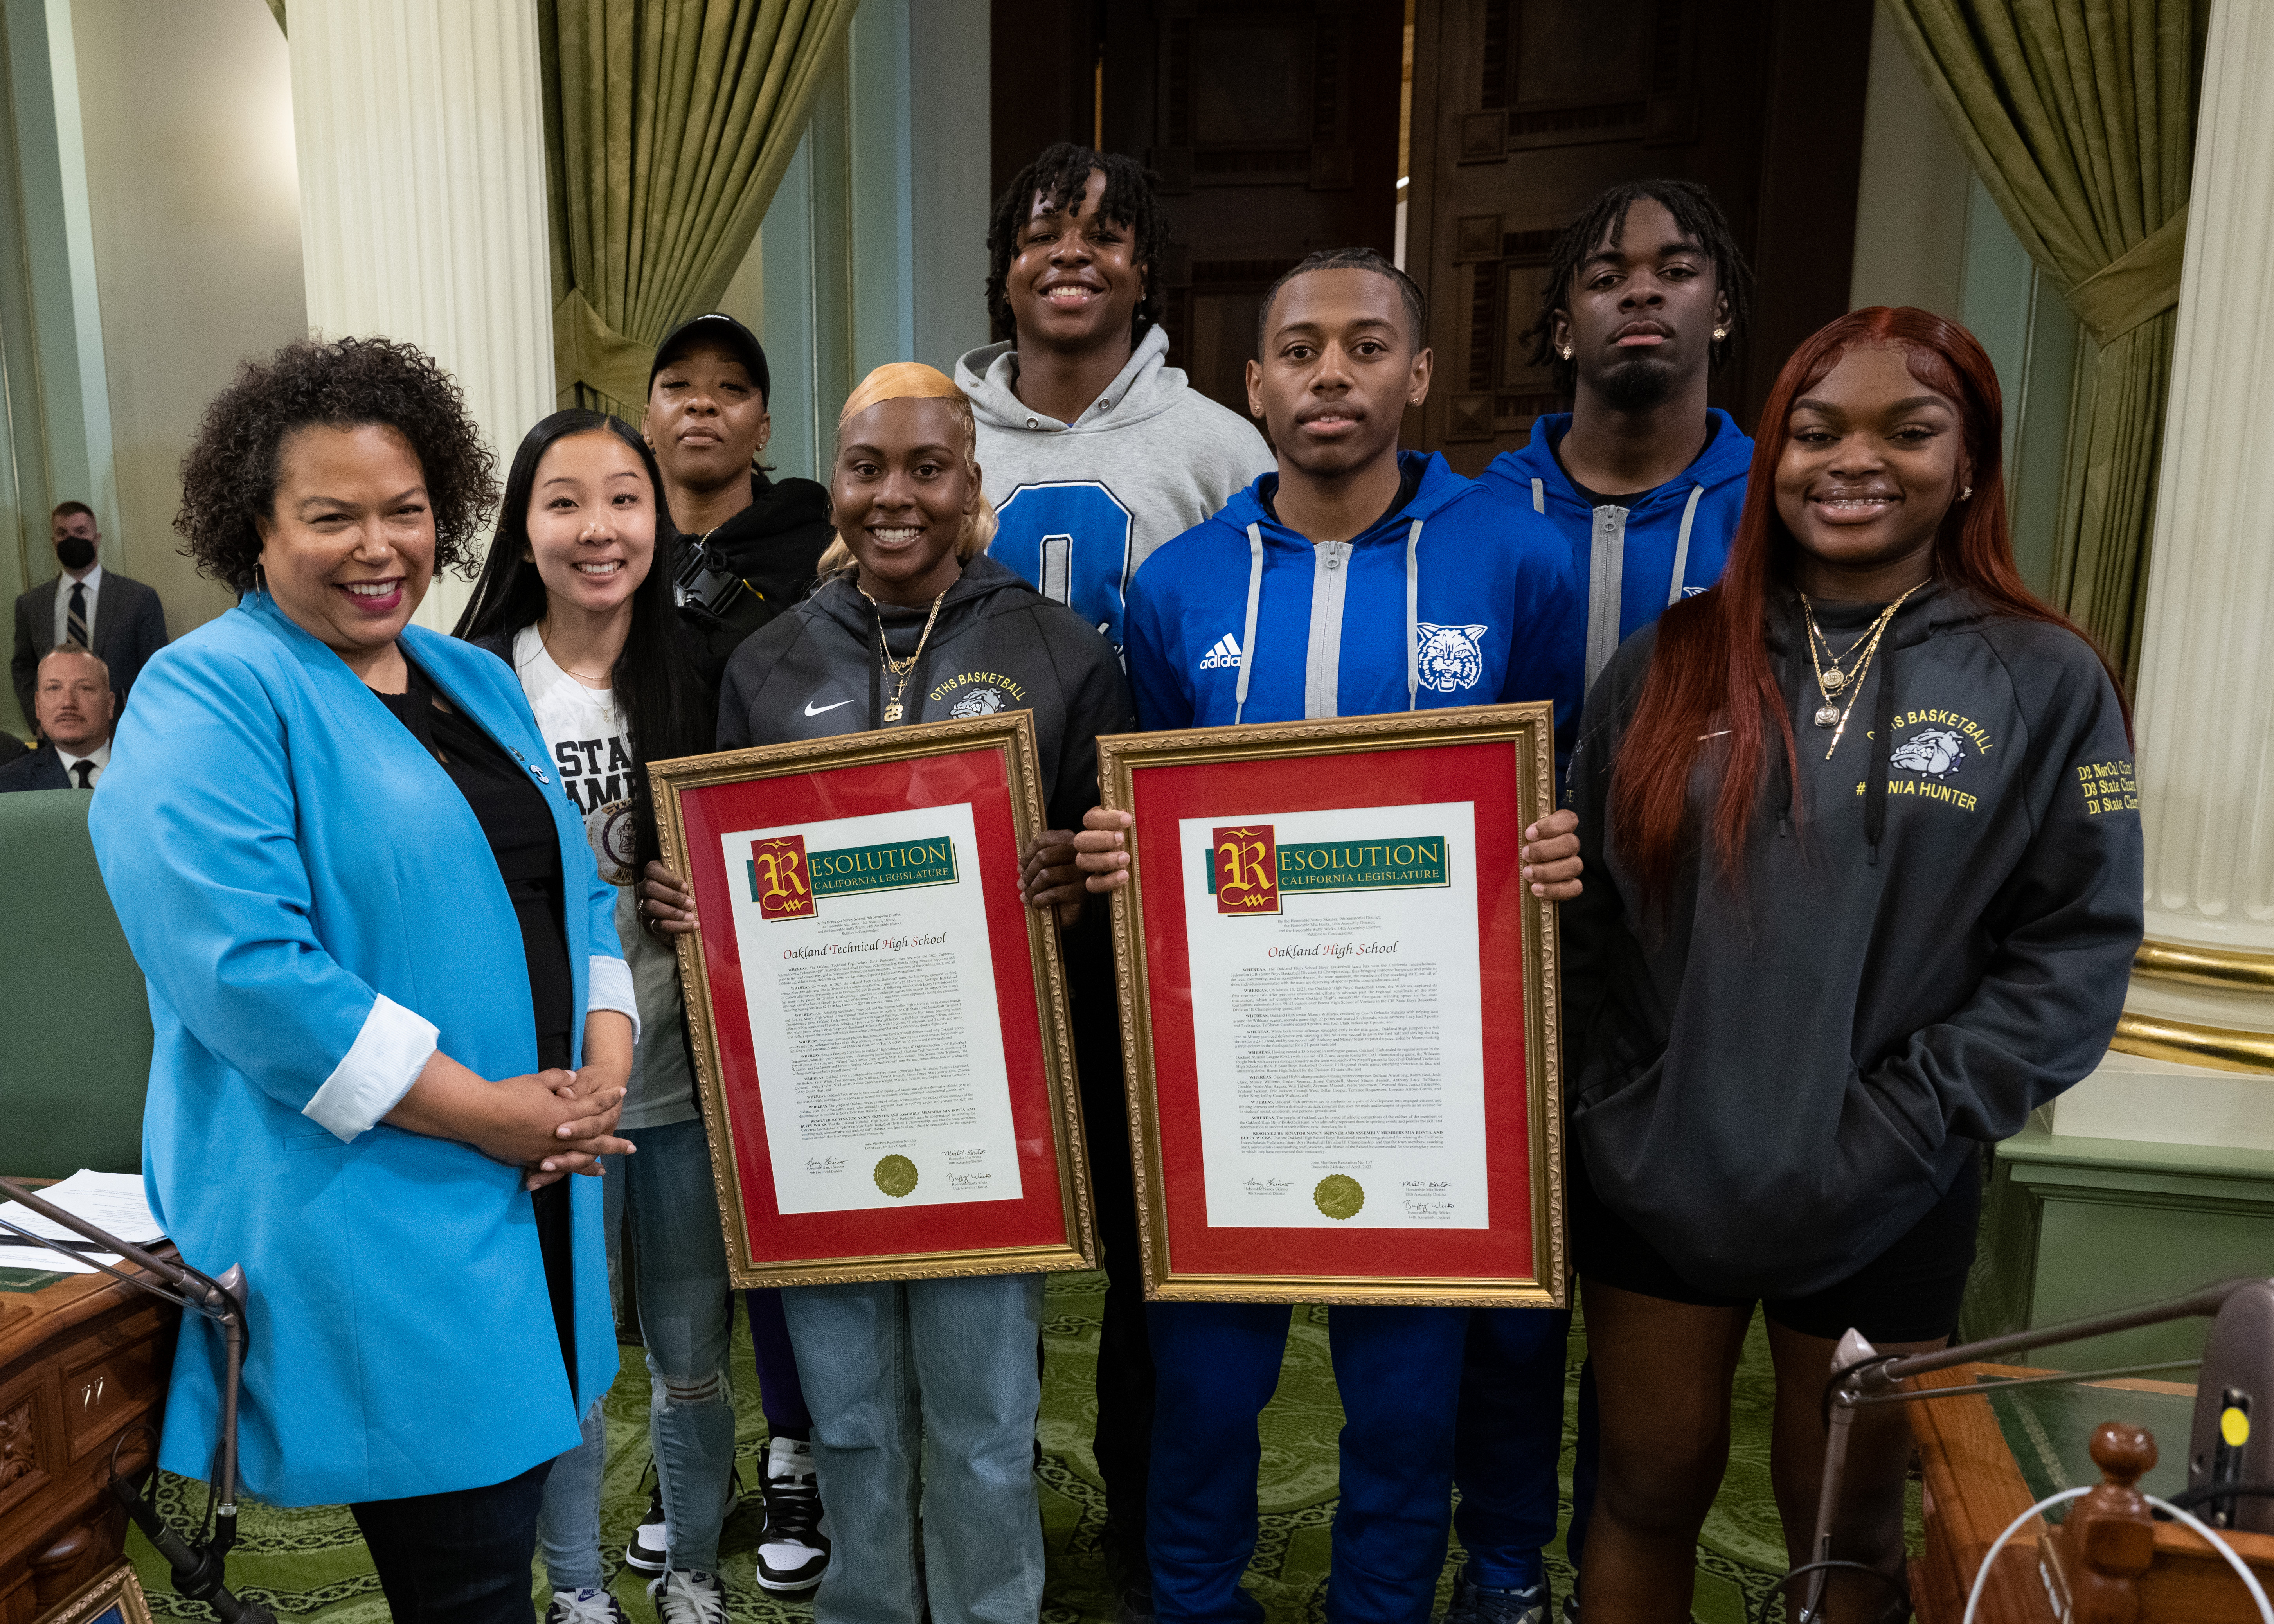 1.	Picture 1 is Assemblymember Bonta with the Captain and Co-Captains of the Oakland High School and Oakland Technical High School during the Assembly Floor Recognition